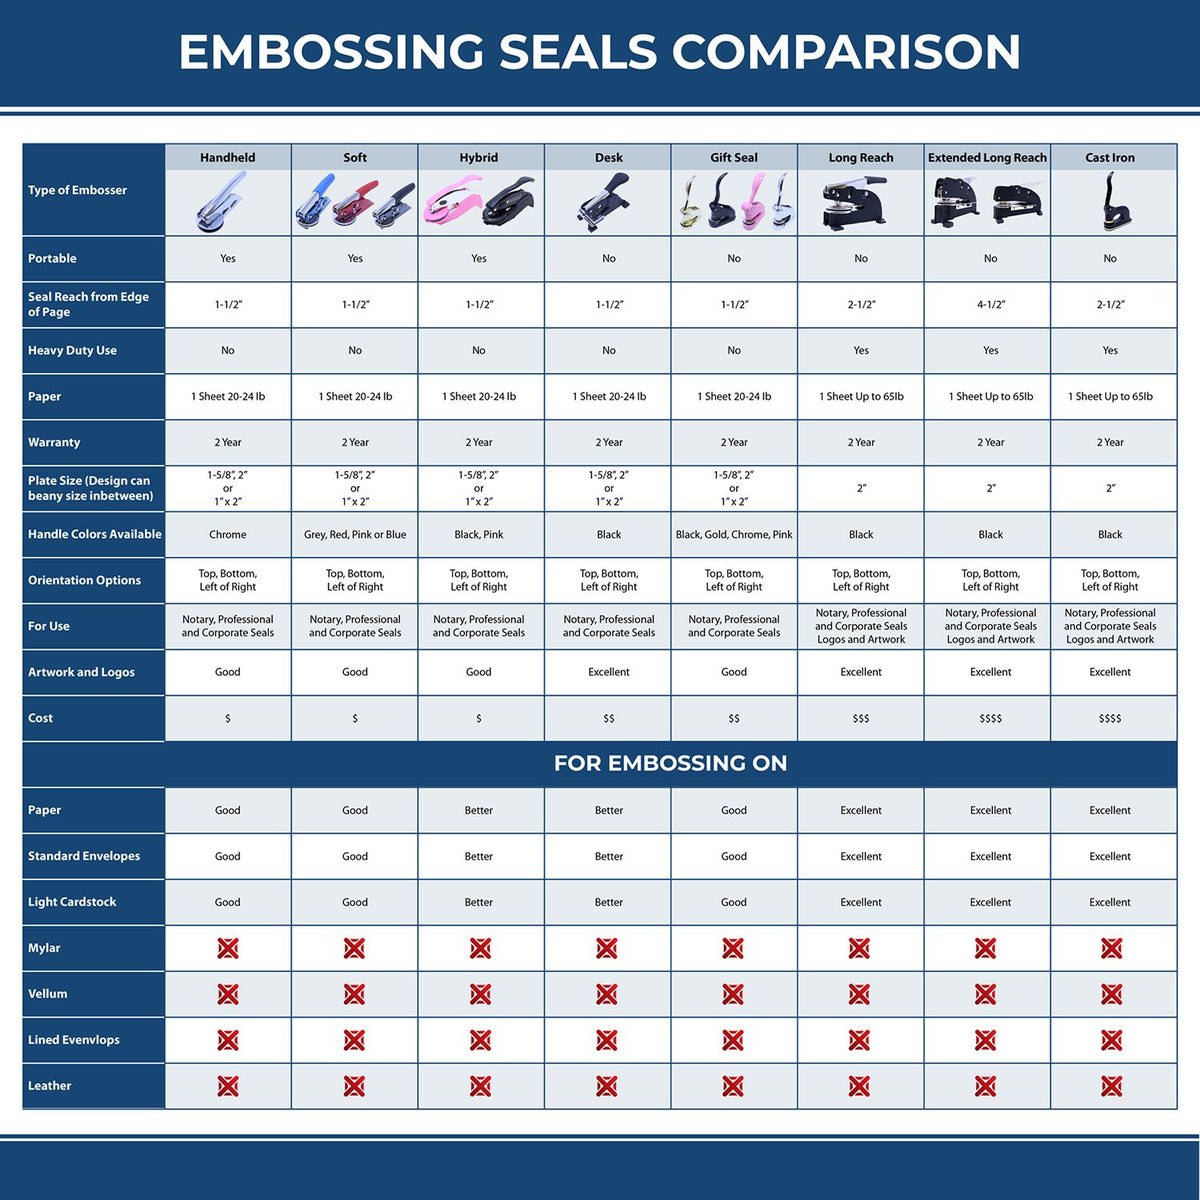 A comparison chart for the different types of mount models available for the Heavy Duty Cast Iron Minnesota Land Surveyor Seal Embosser.